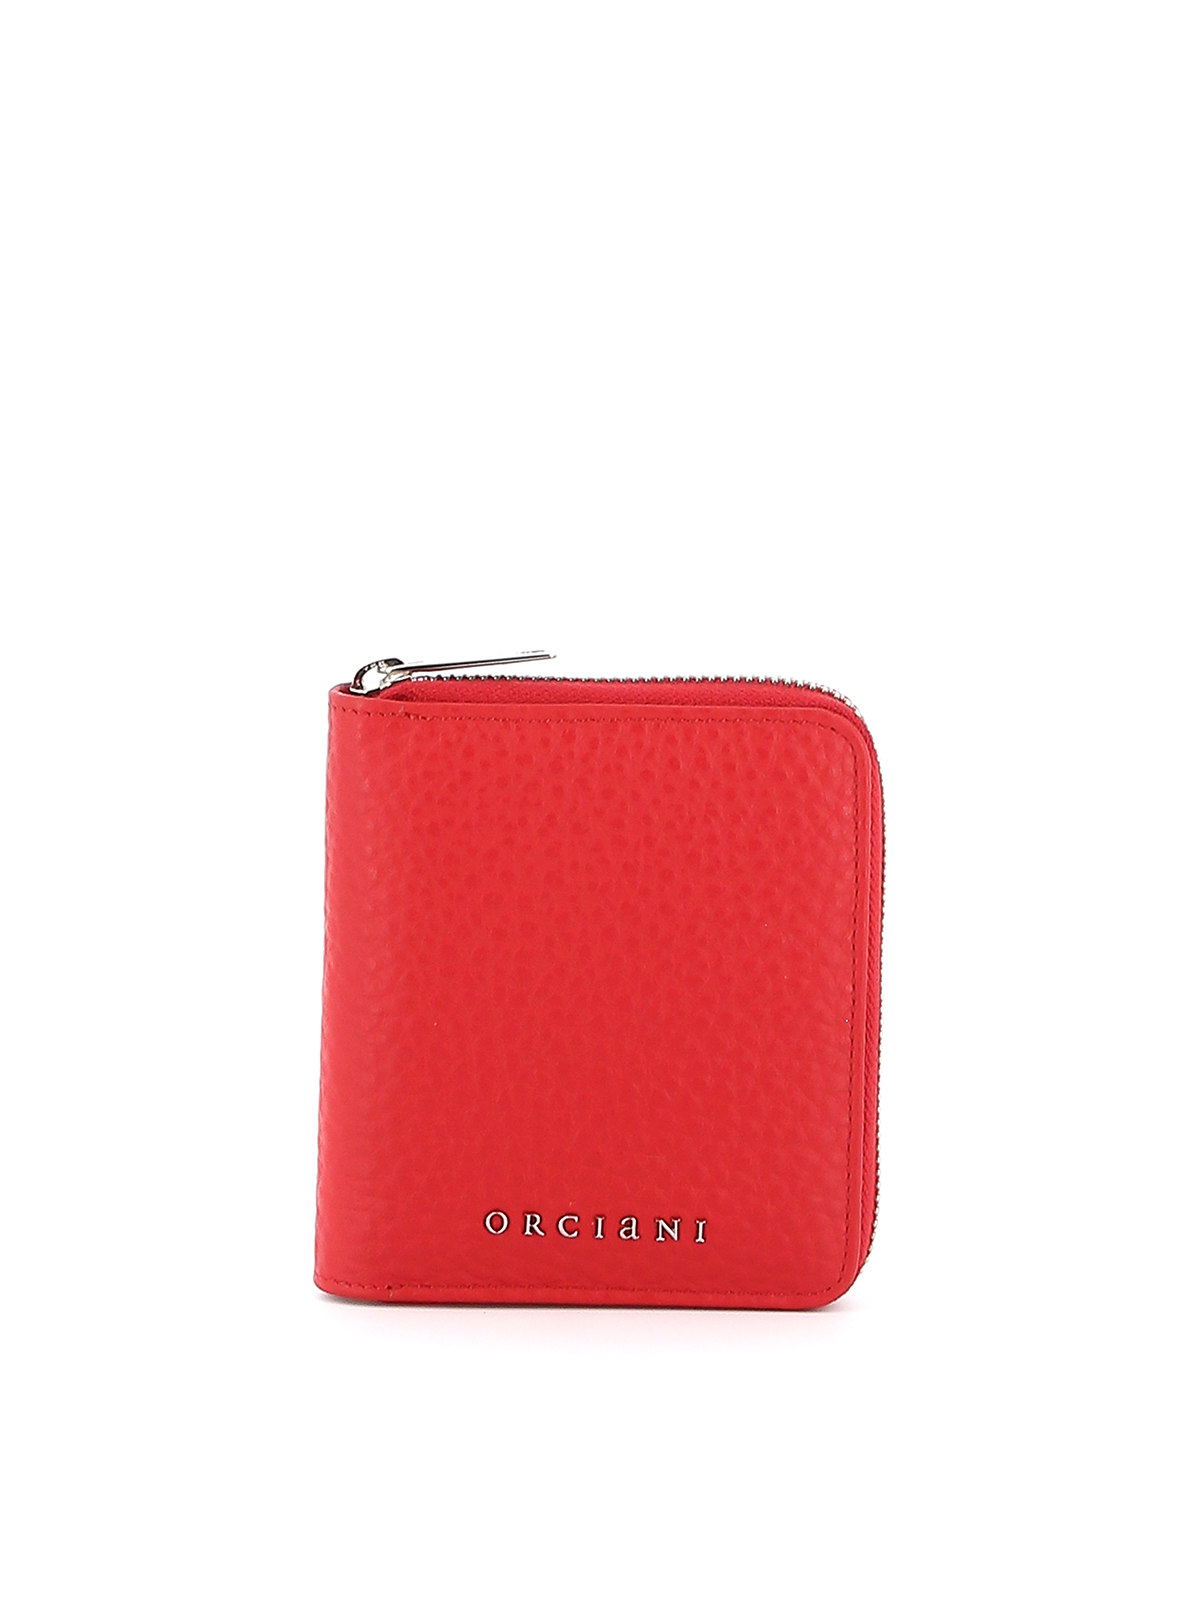 ORCIANI RED PEBBLED LEATHER ZIP AROUND WALLET